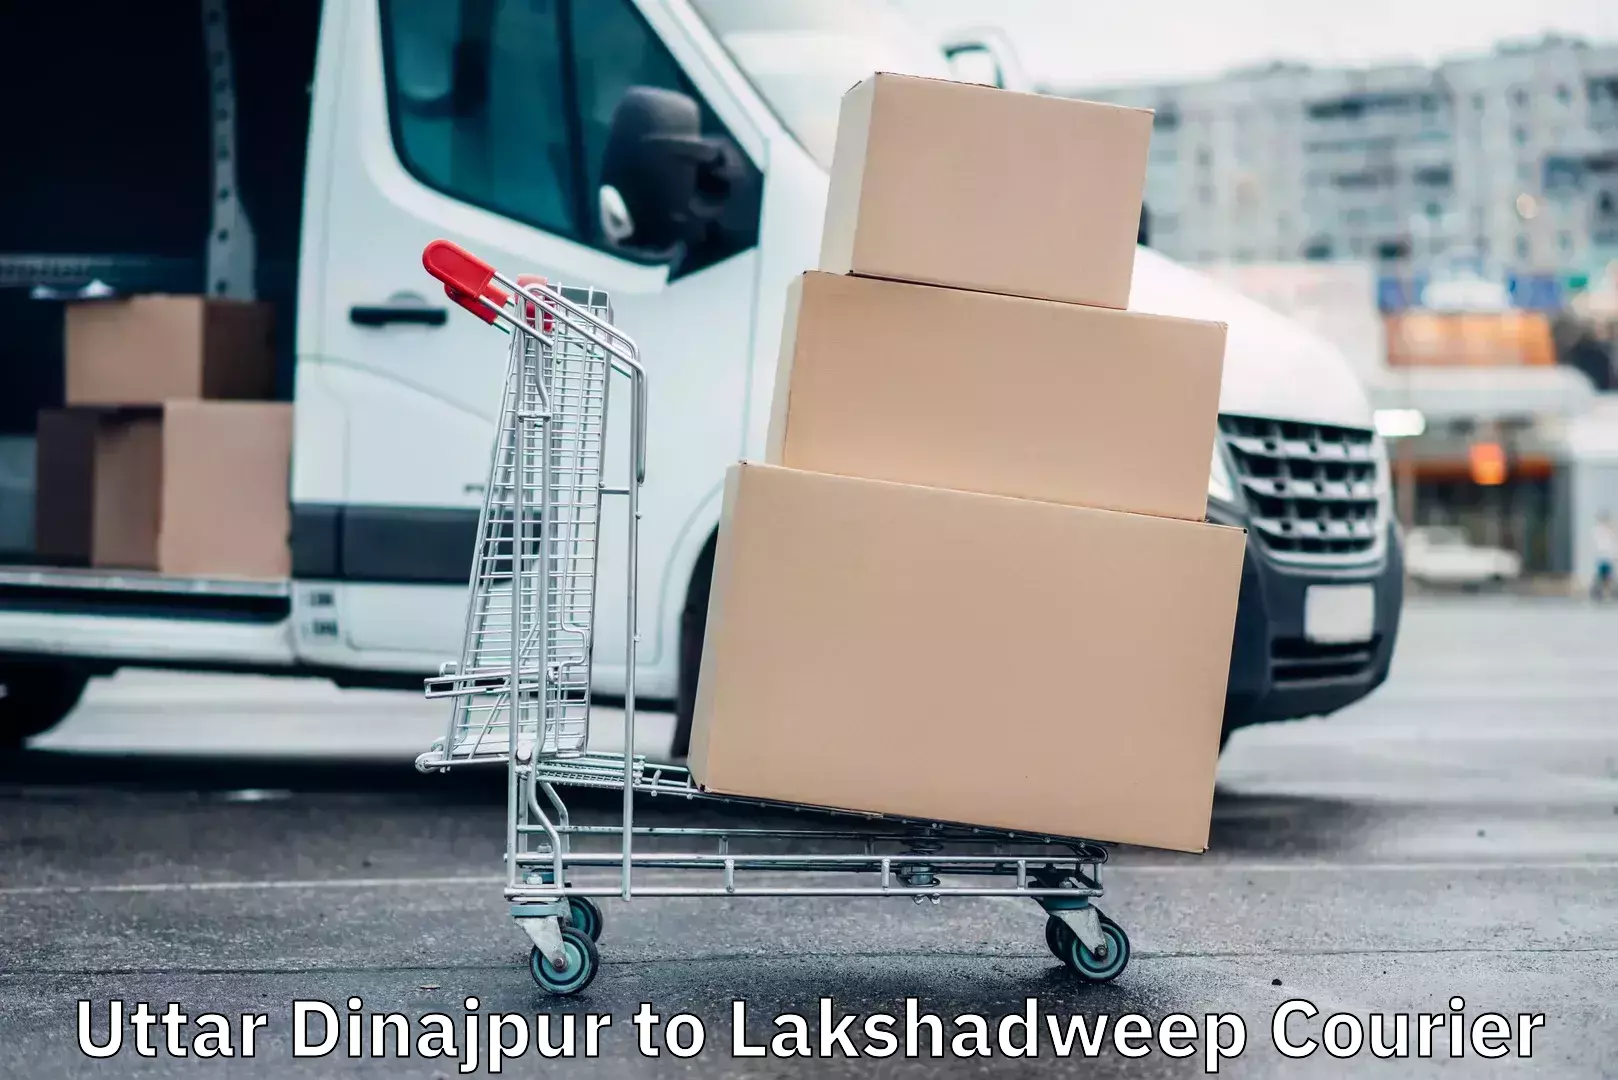 Rapid shipping services Uttar Dinajpur to Lakshadweep